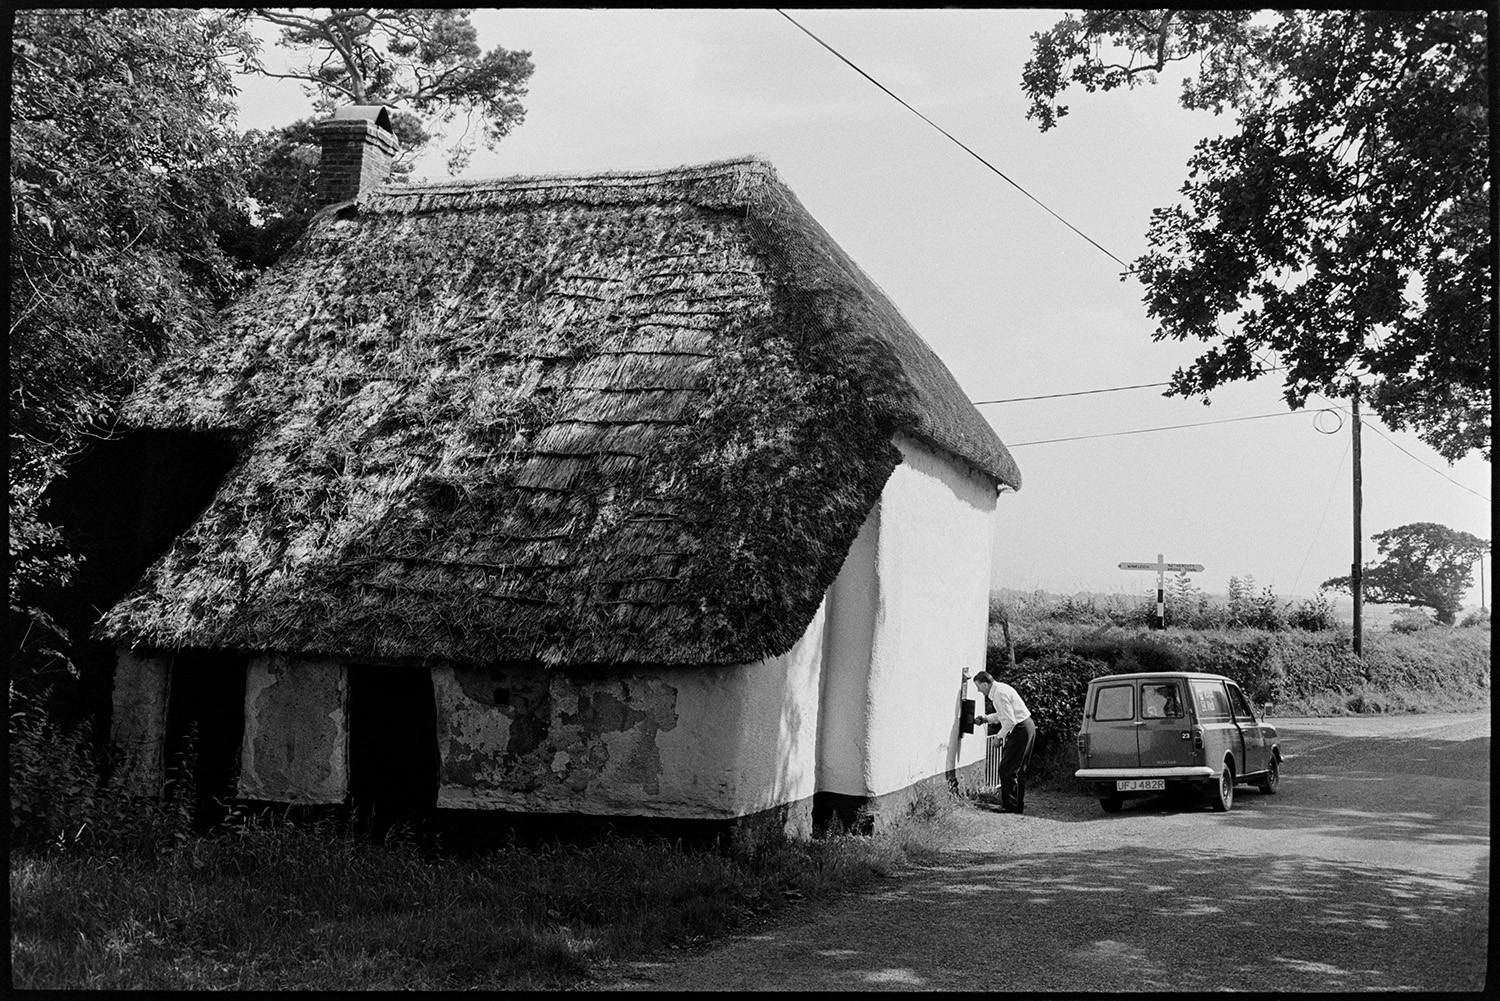 Sloping roof, thatched cottage from rear with postman emptying letter box, post van. 
[A postman collecting letters from a post box in the wall of the thatched cottage with a sloping roof at Nethercott Cross, Iddesleigh. His post van is parked on the road outside the cottage and a signpost can be seen in the hedge in the background.]